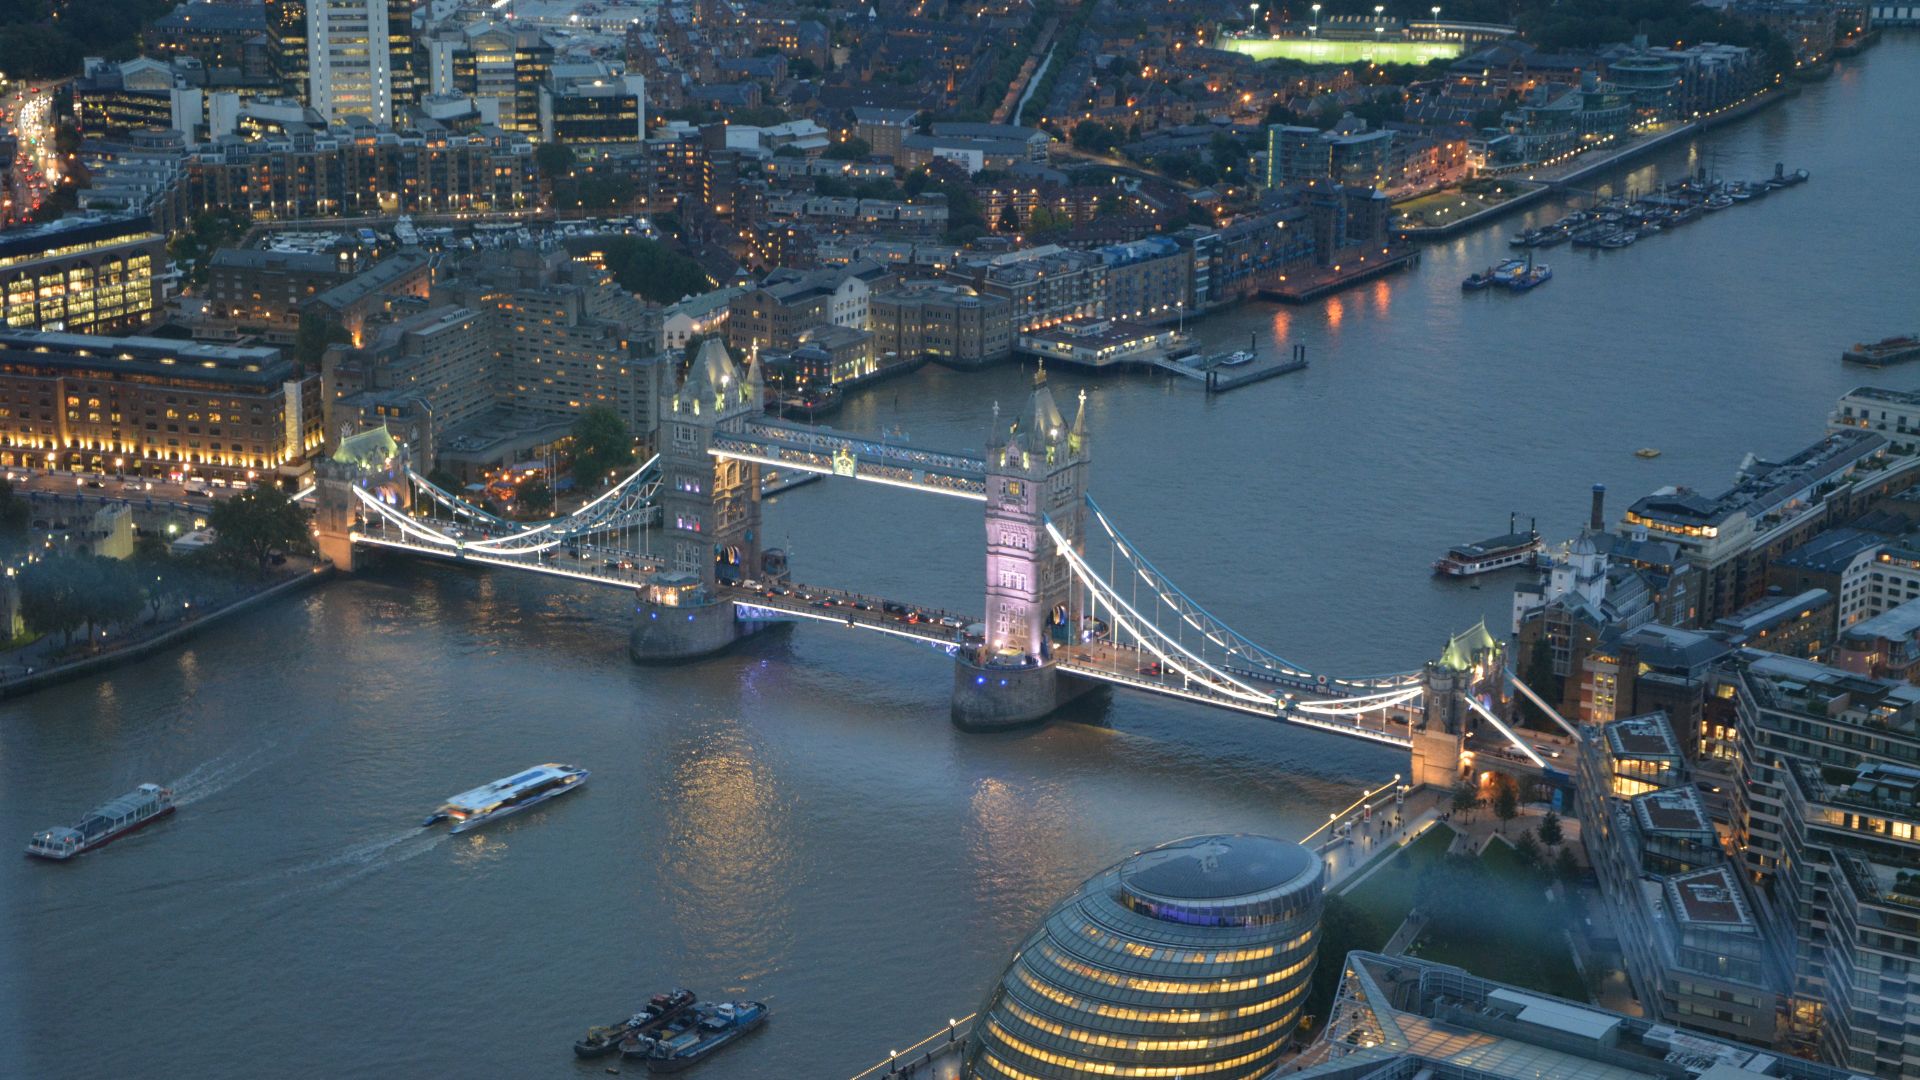 Get Ready to Immerse Yourself in the Rich Culture, History and Charm of London